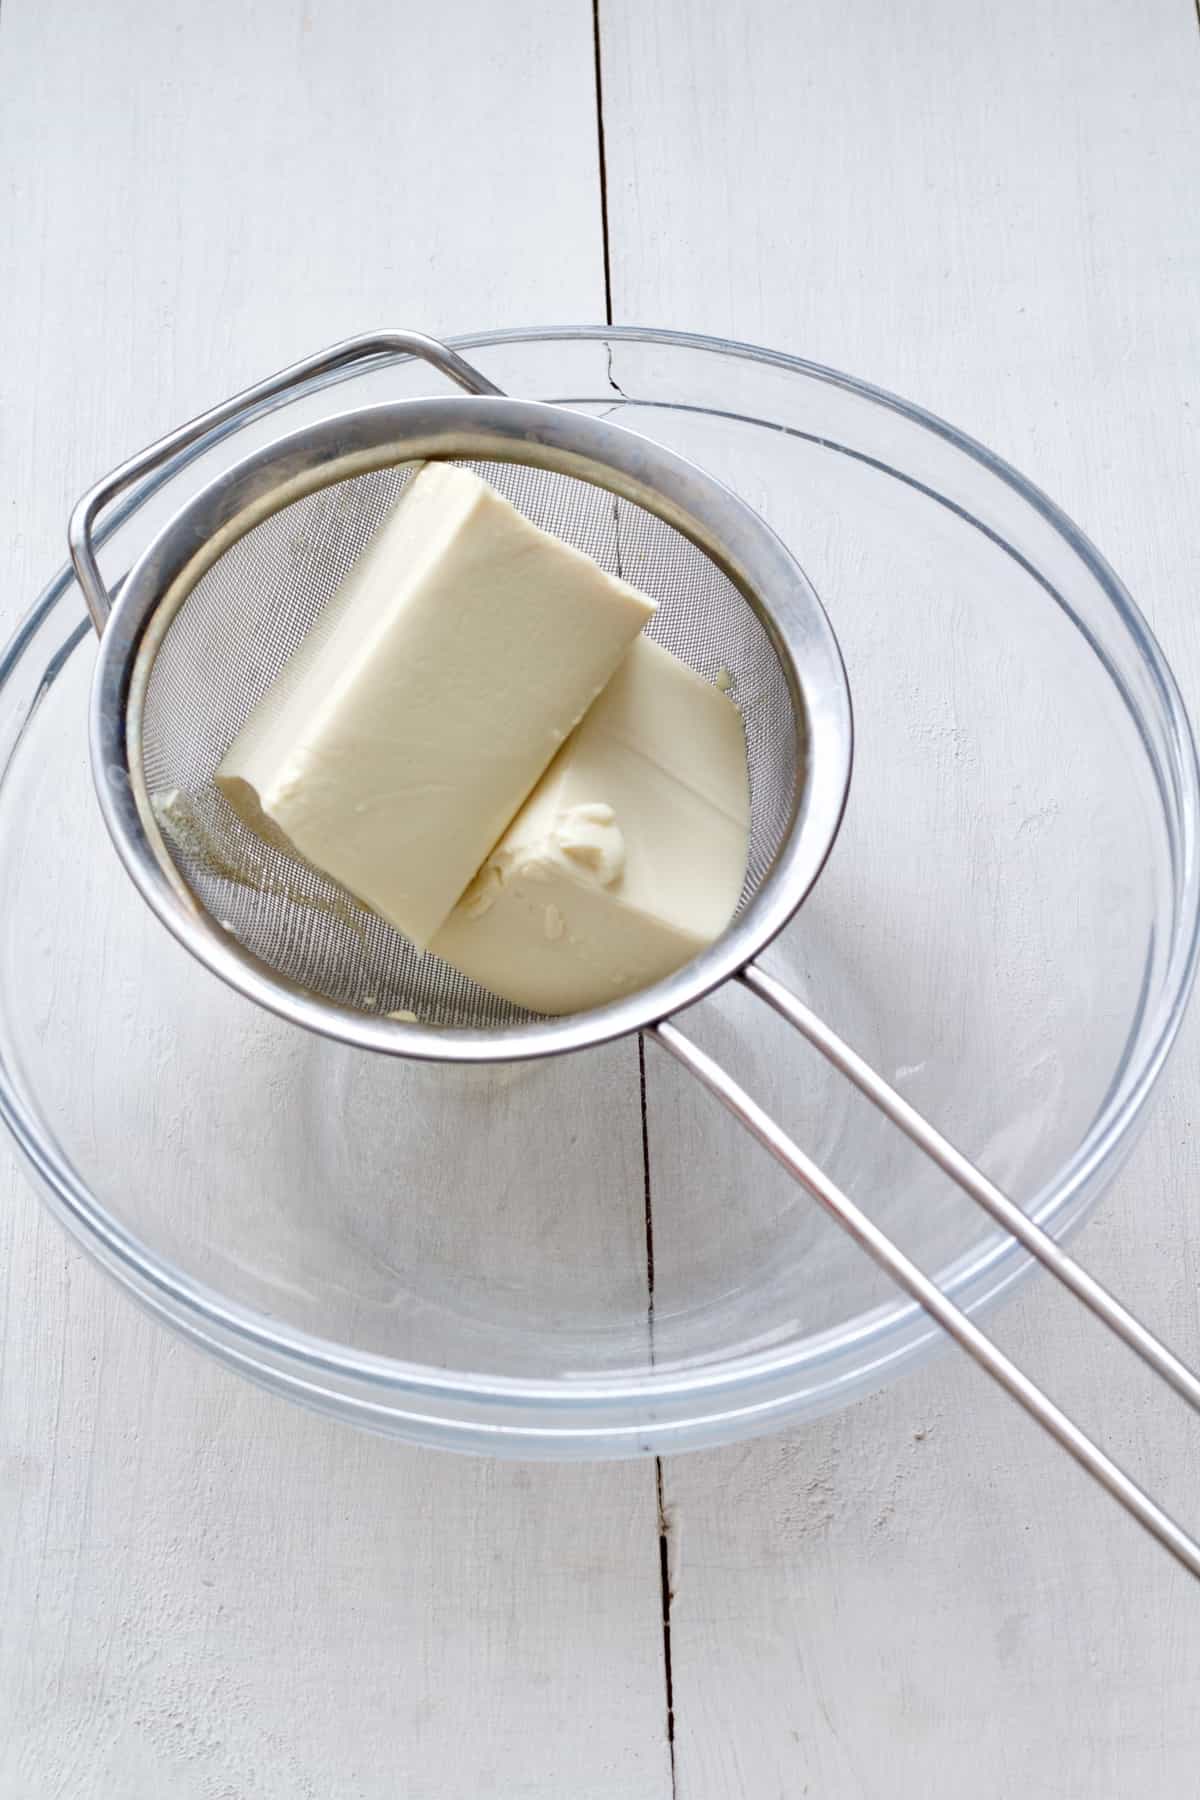 Silken tofu draining on a sieve over a bowl.